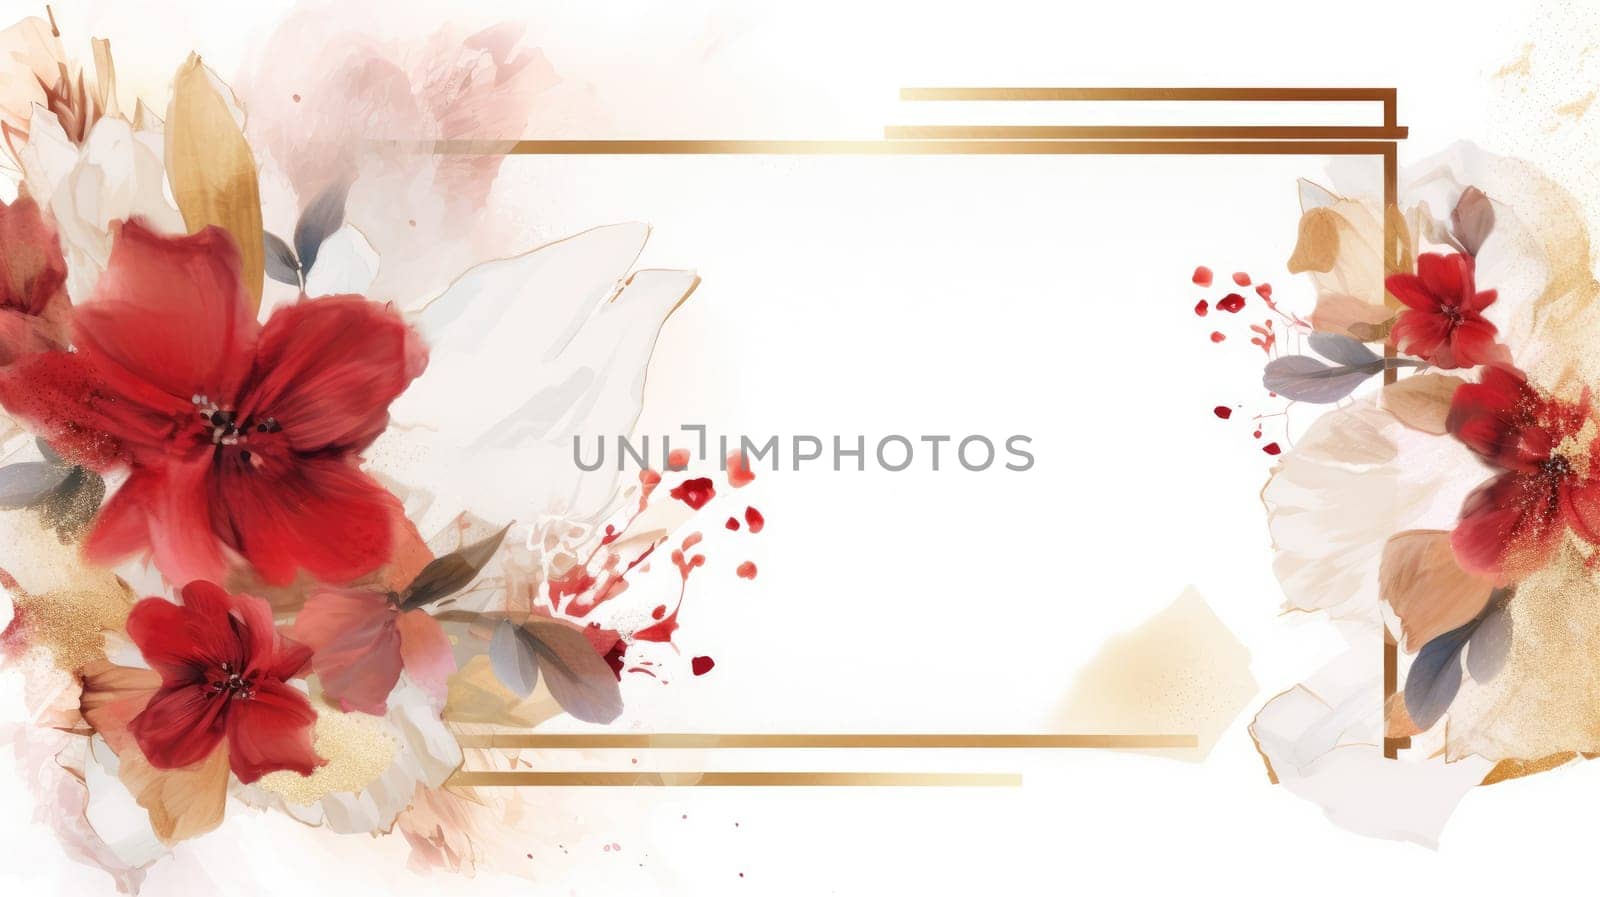 Watercolor abstract design for background wedding or buzzy social media banner by biancoblue